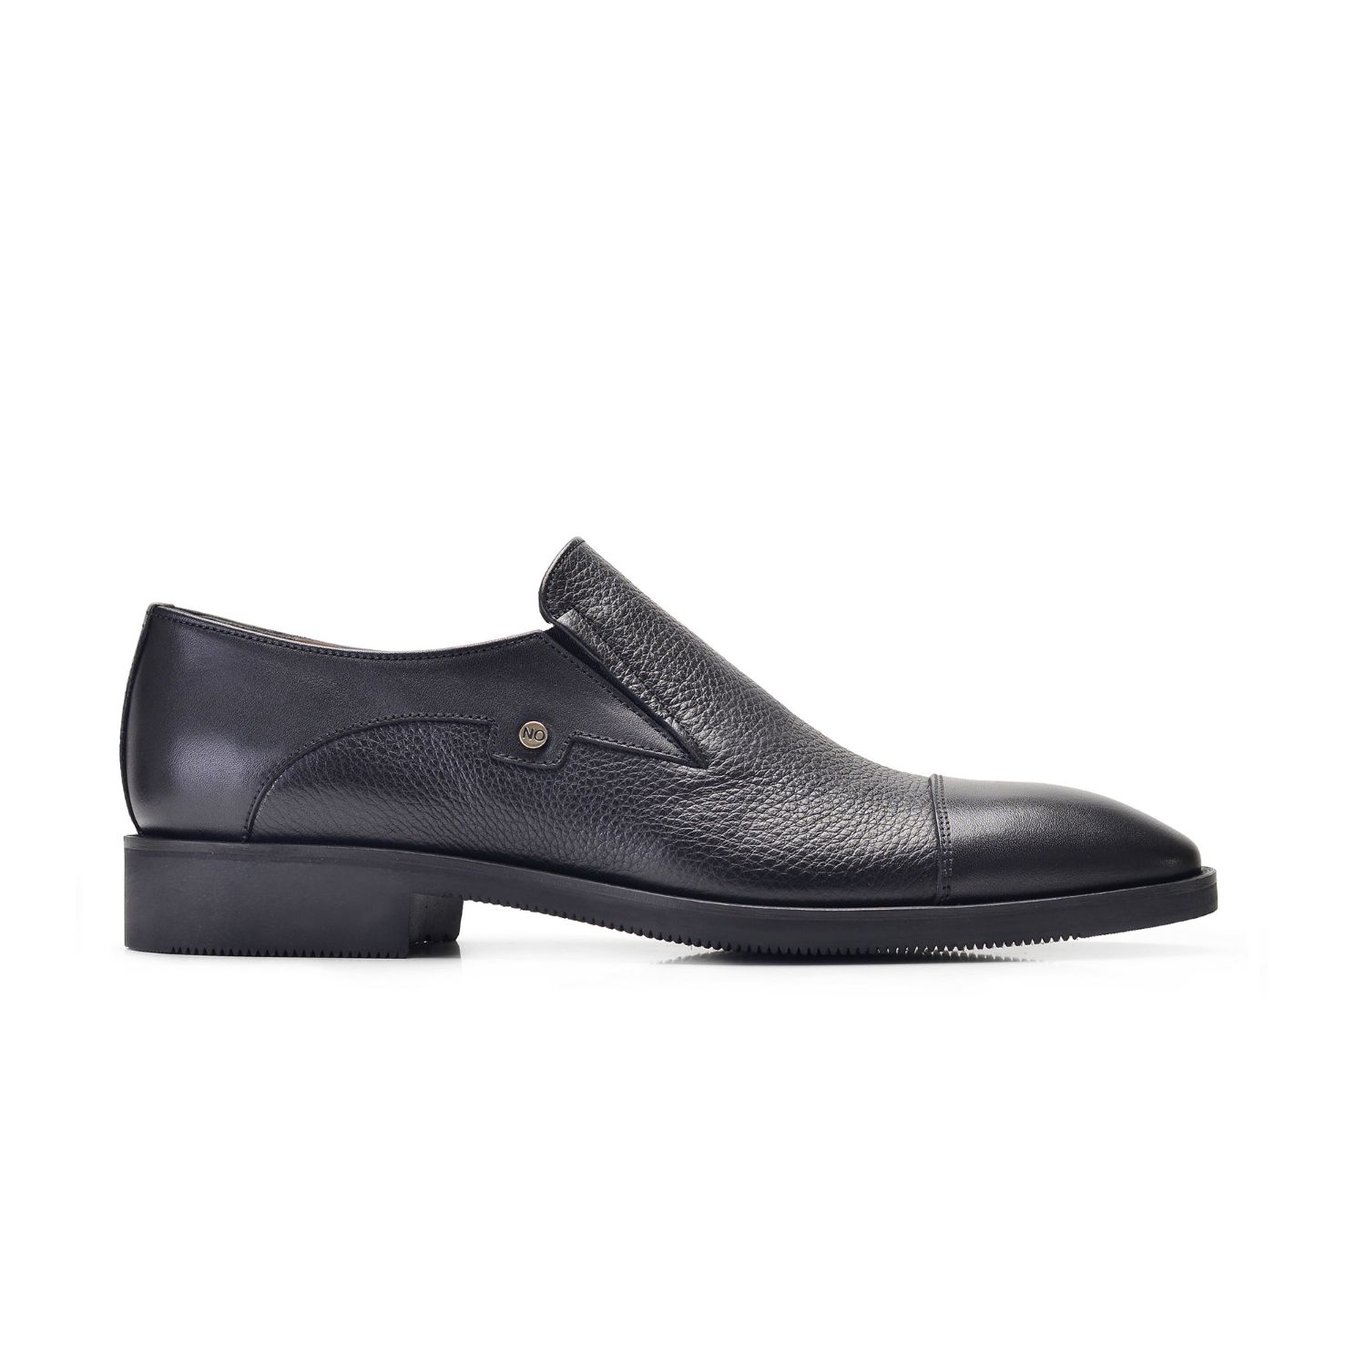 Nevzat Onay Genuine Leather Black Men Classical Shoes -11952-